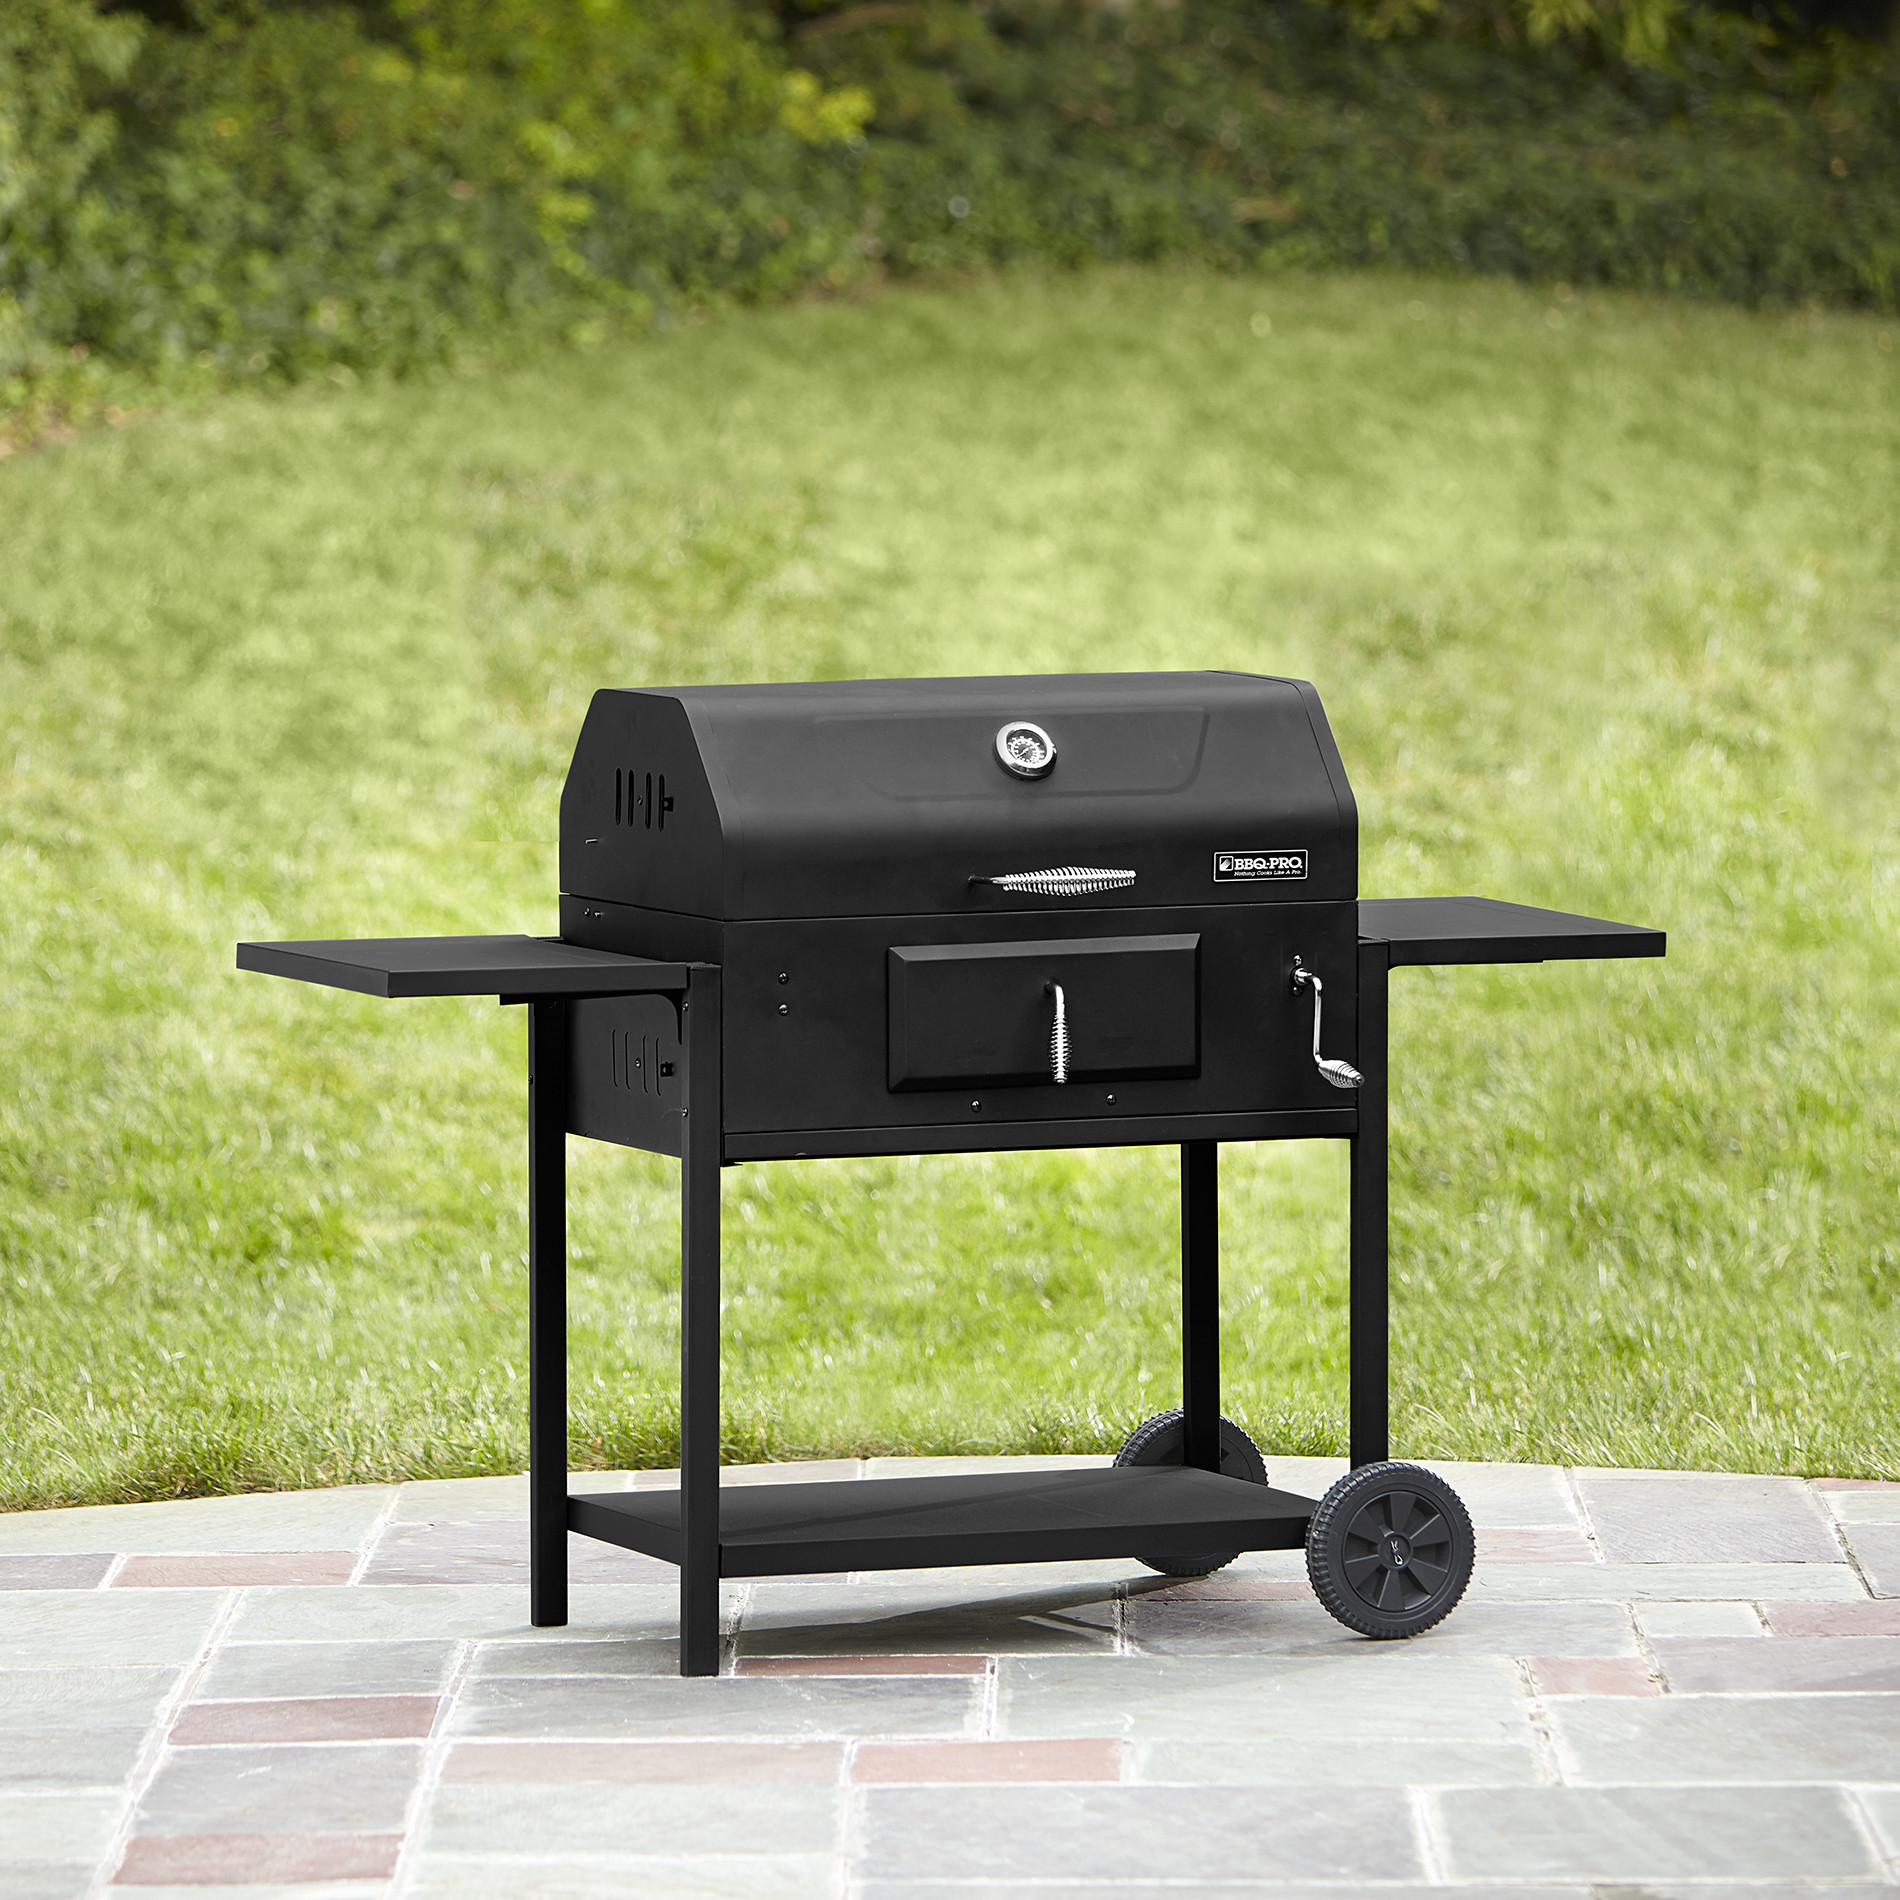 Backyard Grill Grills
 BBQ Pro Deluxe Charcoal Grill Outdoor Living Grills